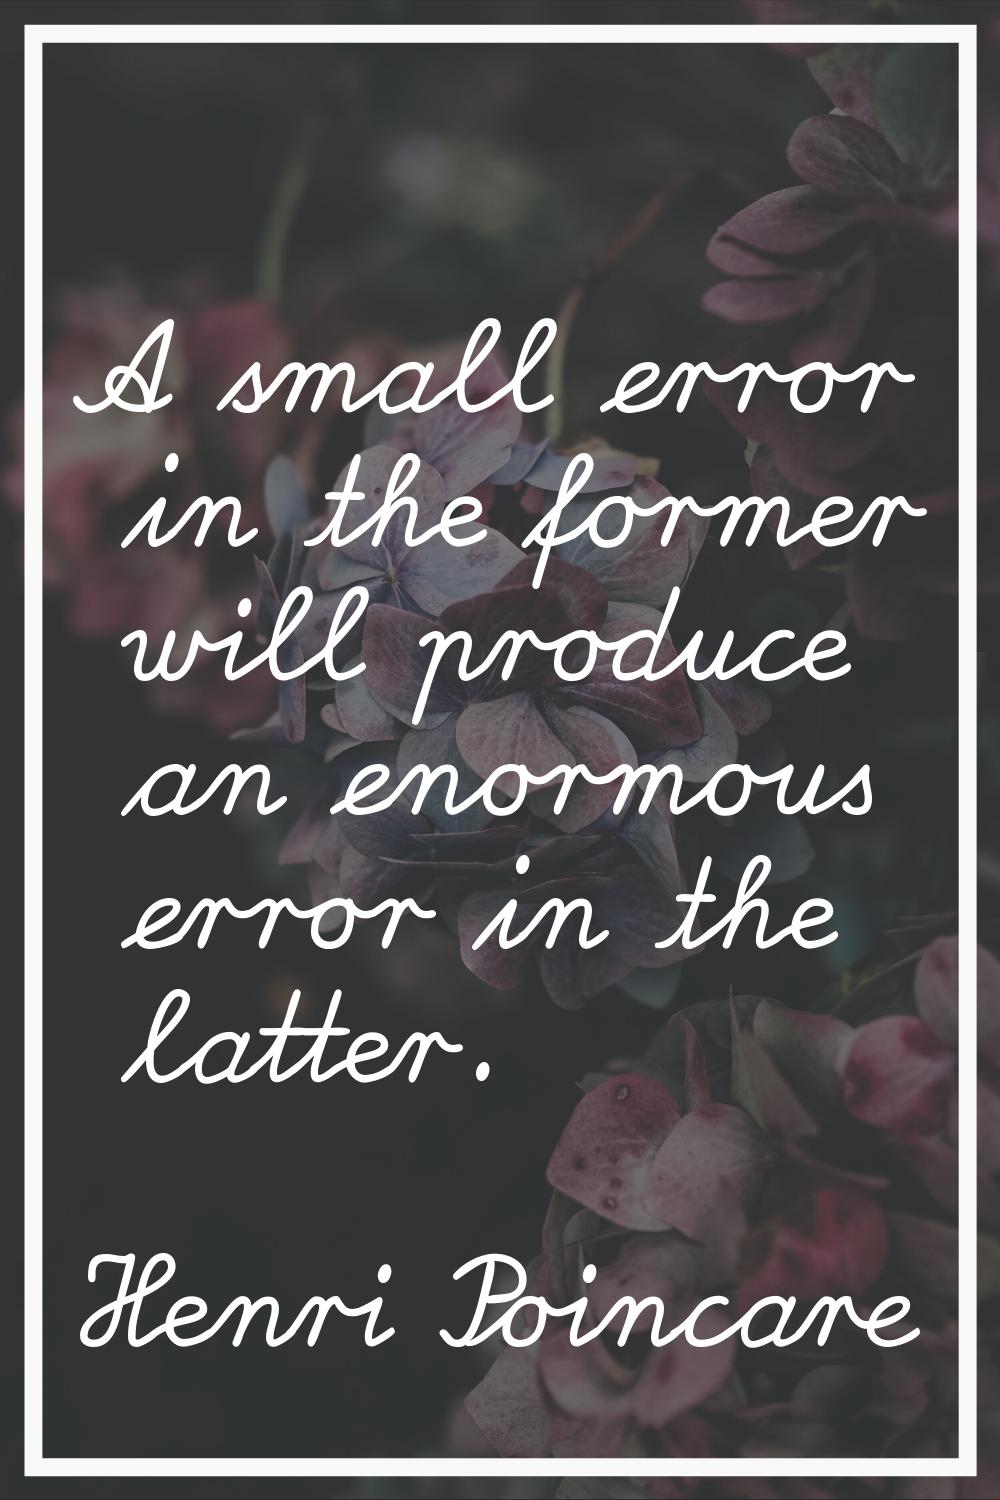 A small error in the former will produce an enormous error in the latter.